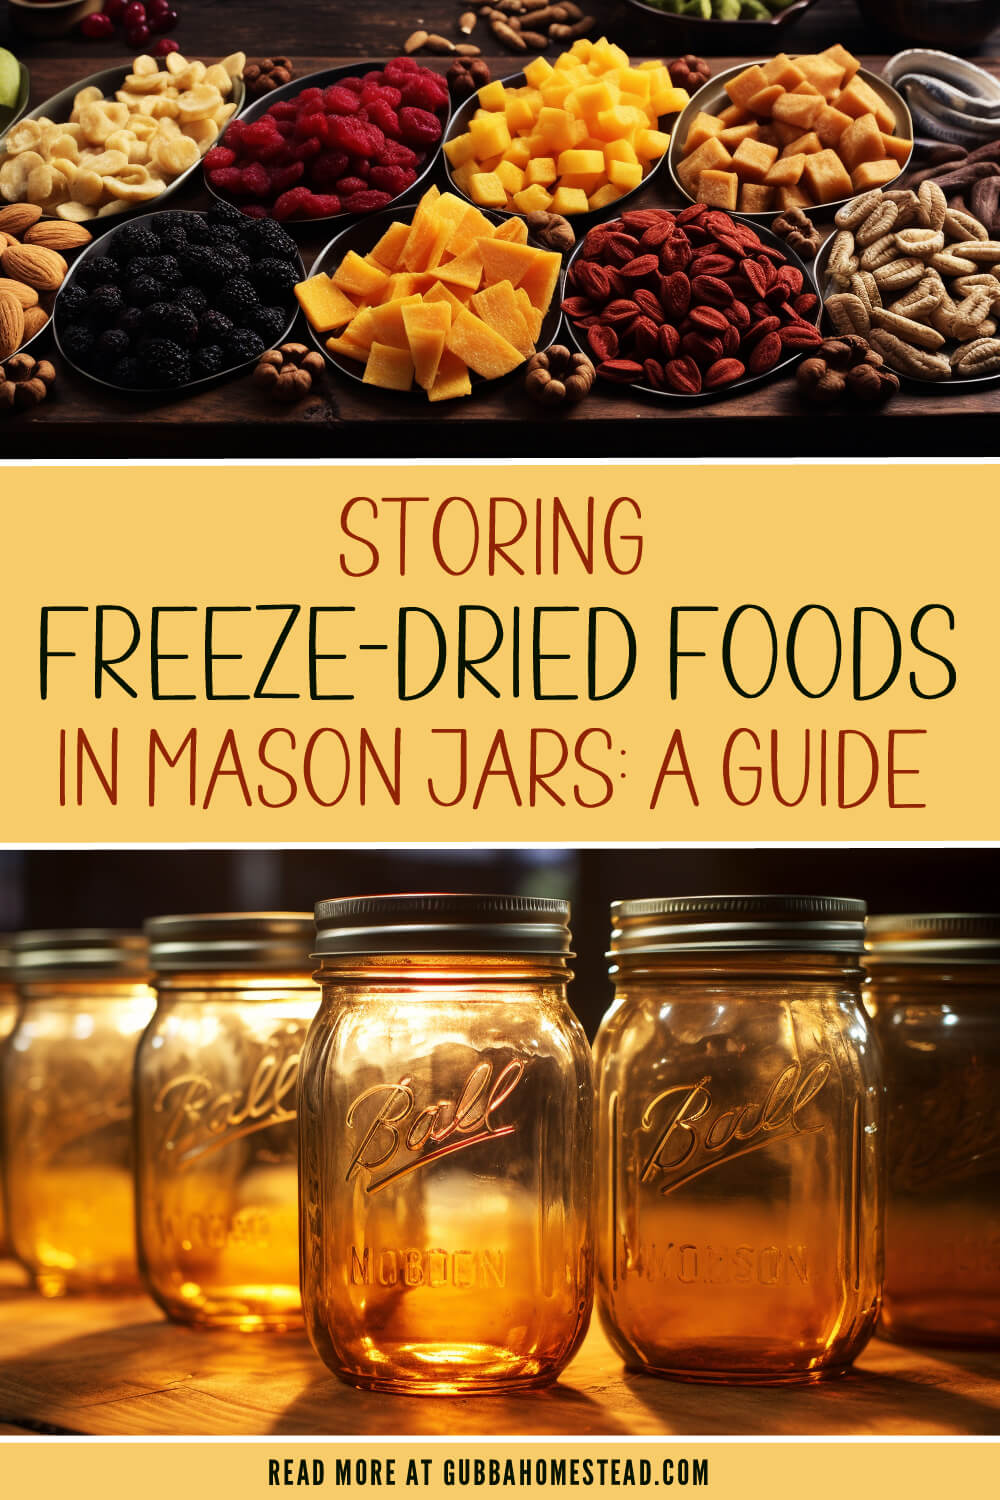 Storing Freeze-Dried Foods In Mason Jars: A Guide